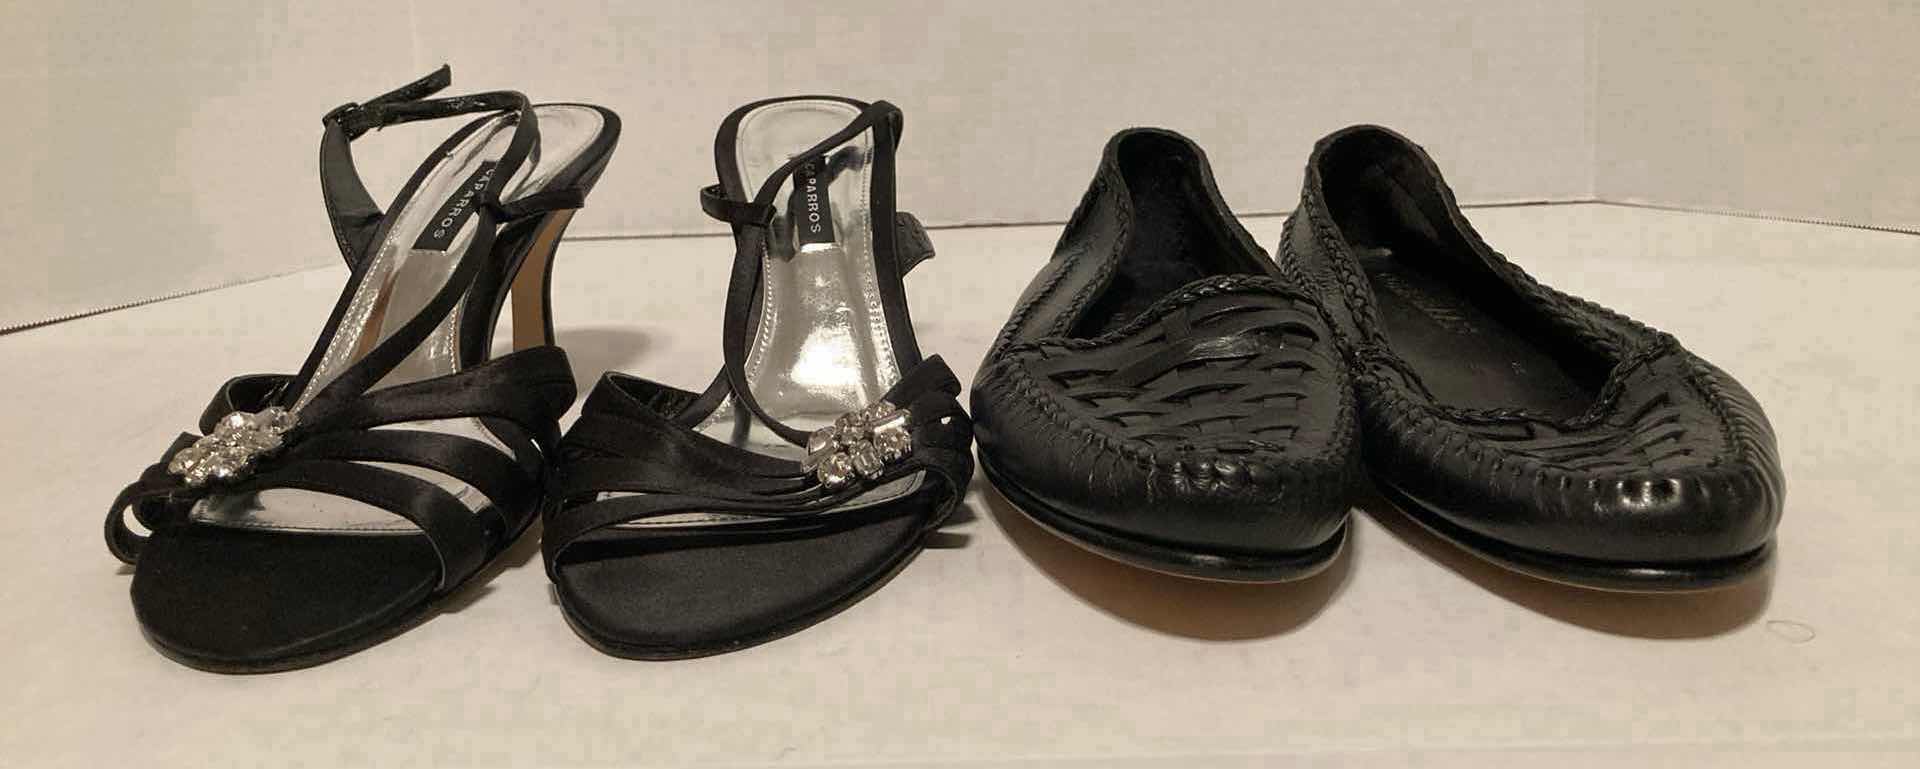 Photo 3 of CAPARROS BLACK OPEN TOE HEELS & COLE HAAN BLACK WOVEN LEATHER LOAFERS WOMEN’S SIZE 8-8.5